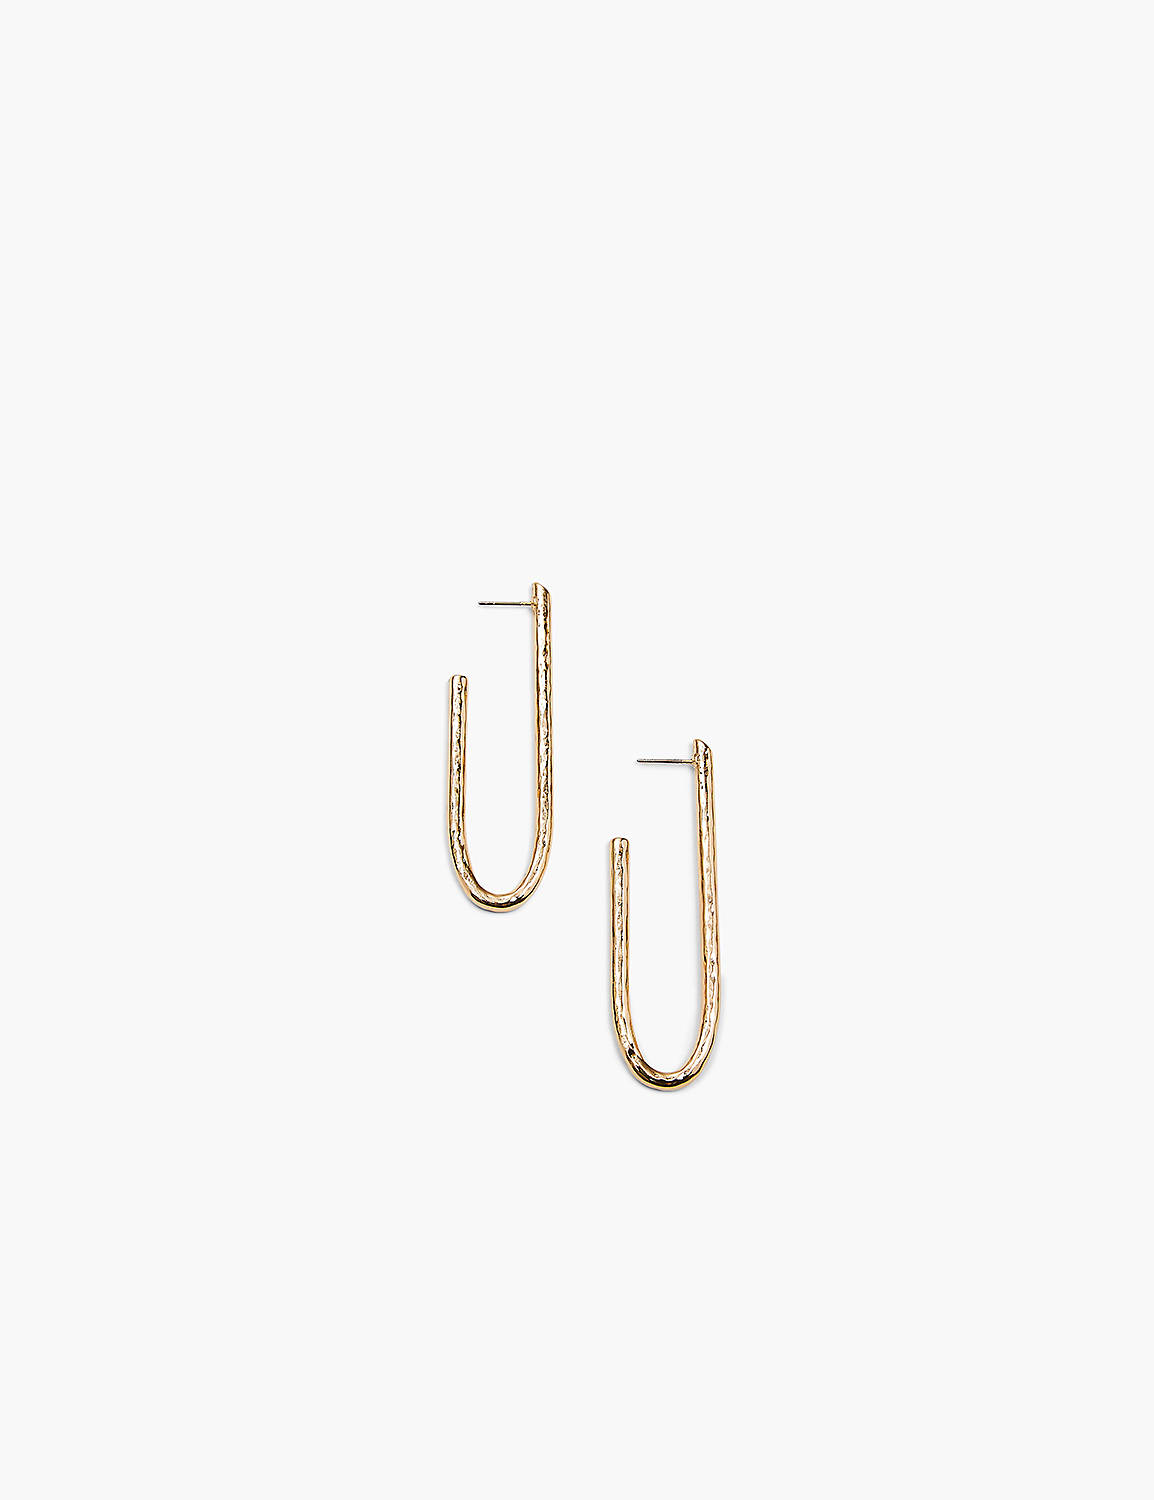 Hammered Oblong Hoop Earrings Product Image 1